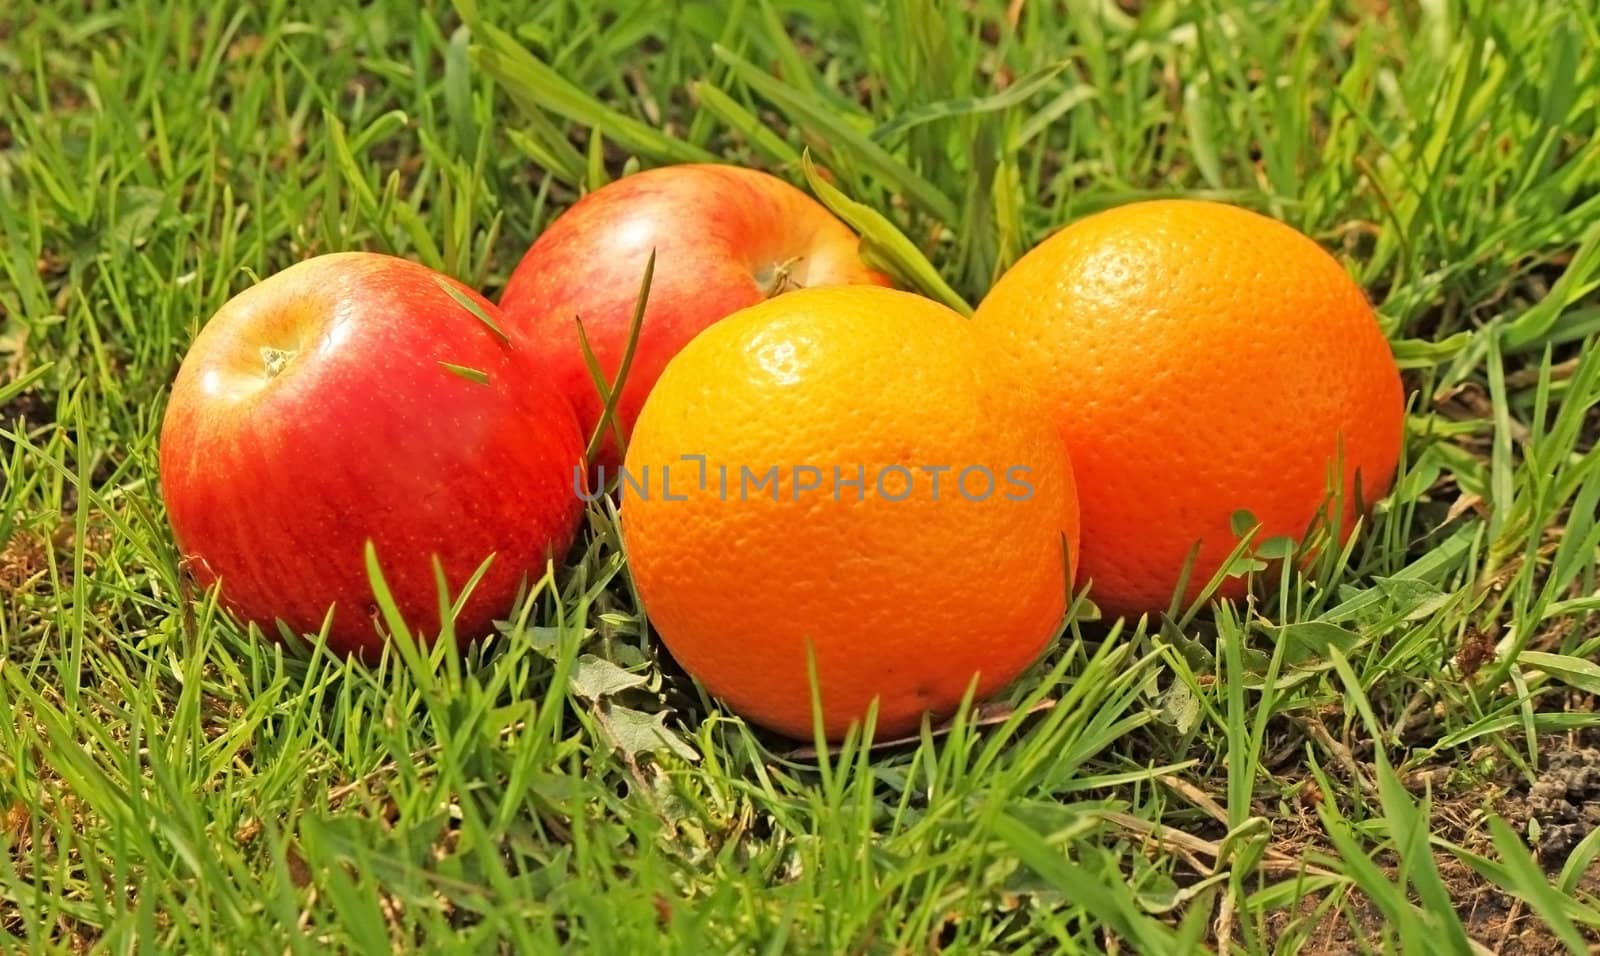 Apples and oranges in the green grass